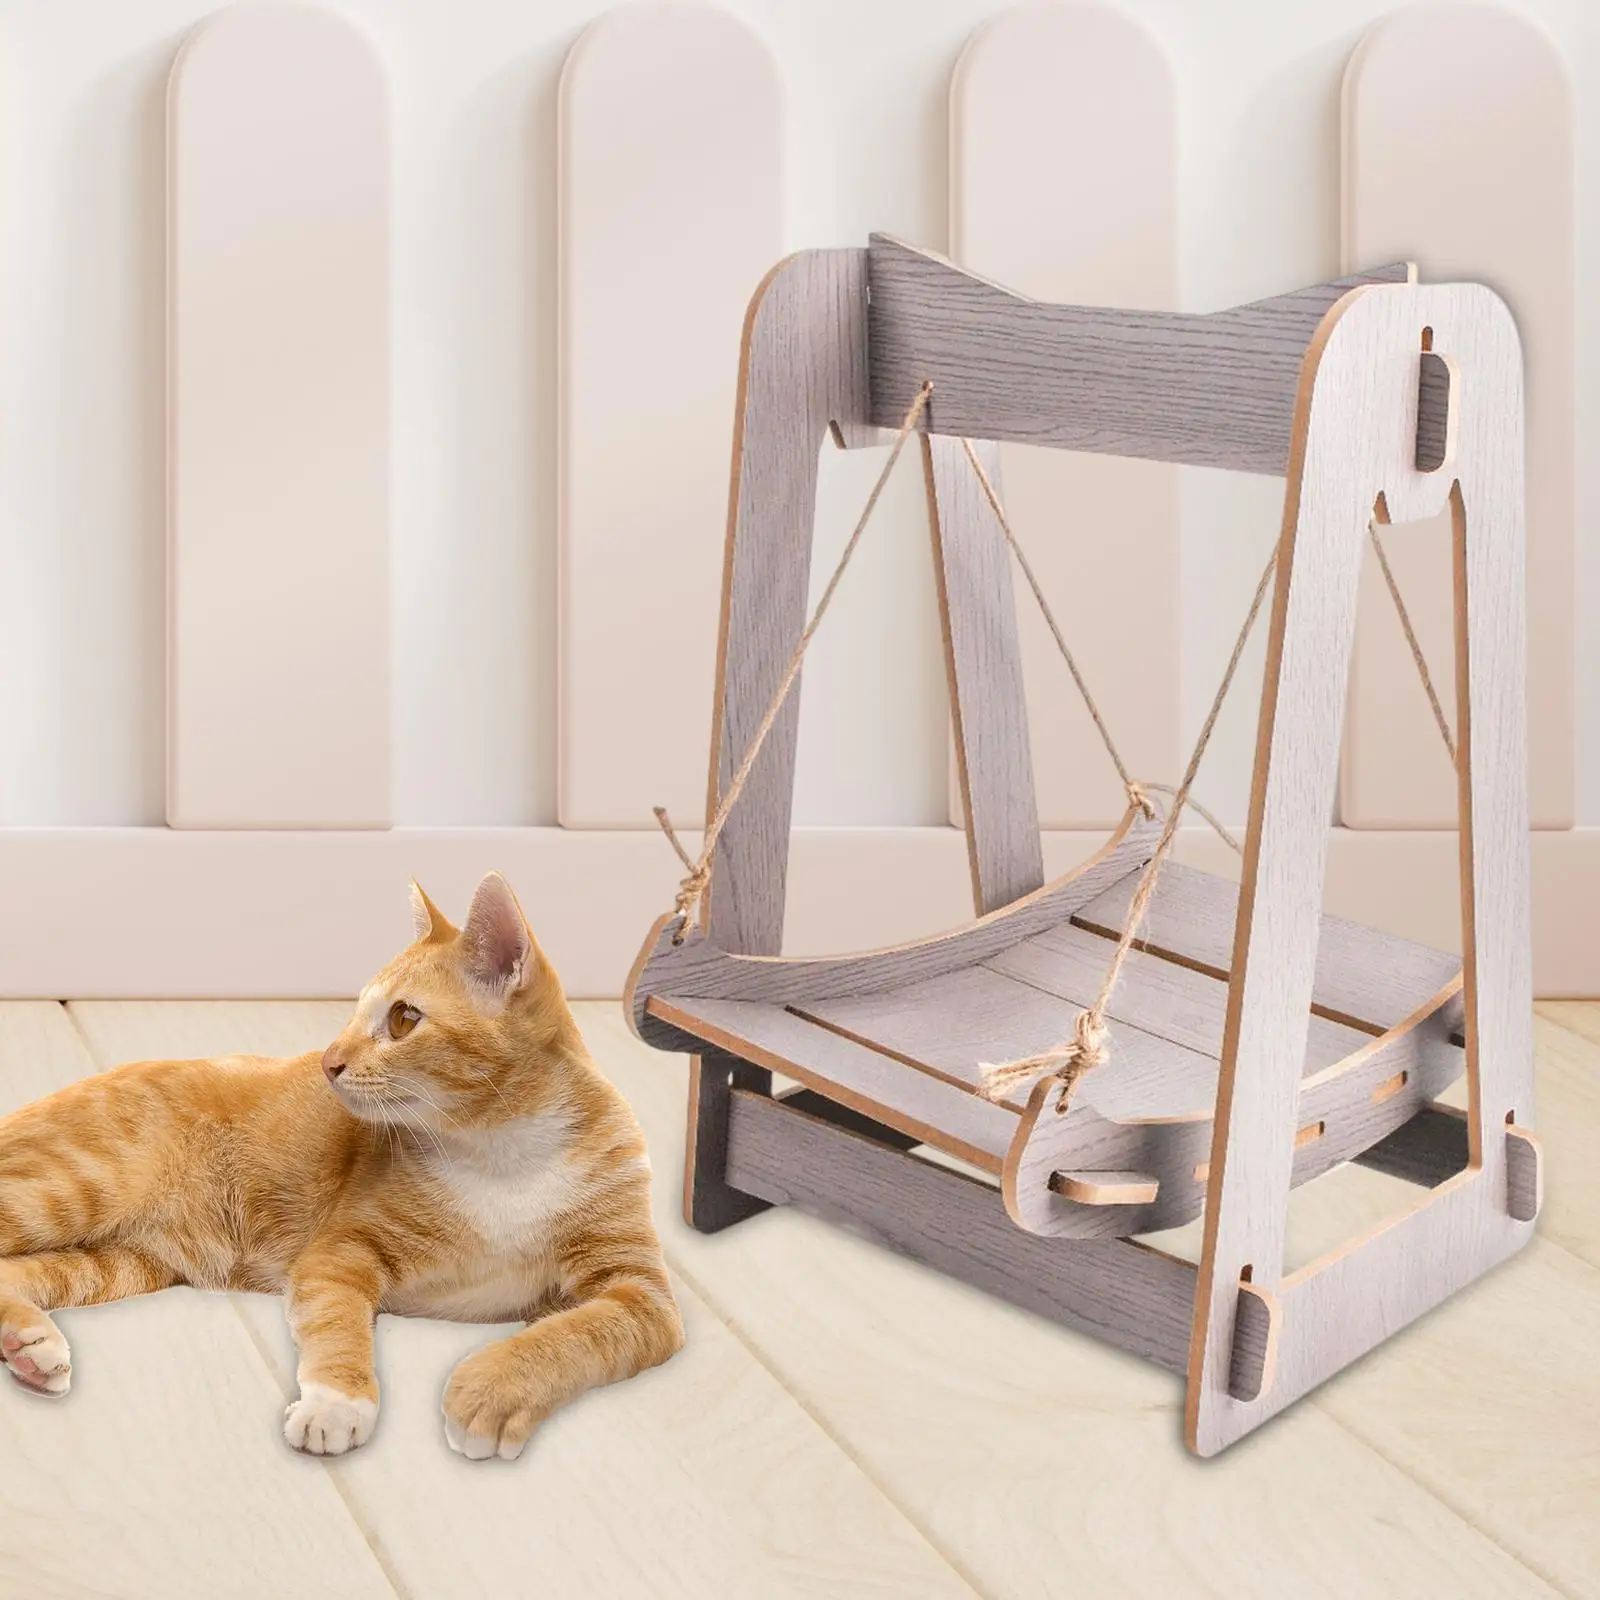 Wooden Cat Hammock Bed Scratcher Rope Lounger Wear Resistant Removable Rest Pets Supplies Pet Hanging Swing for Medium Cats